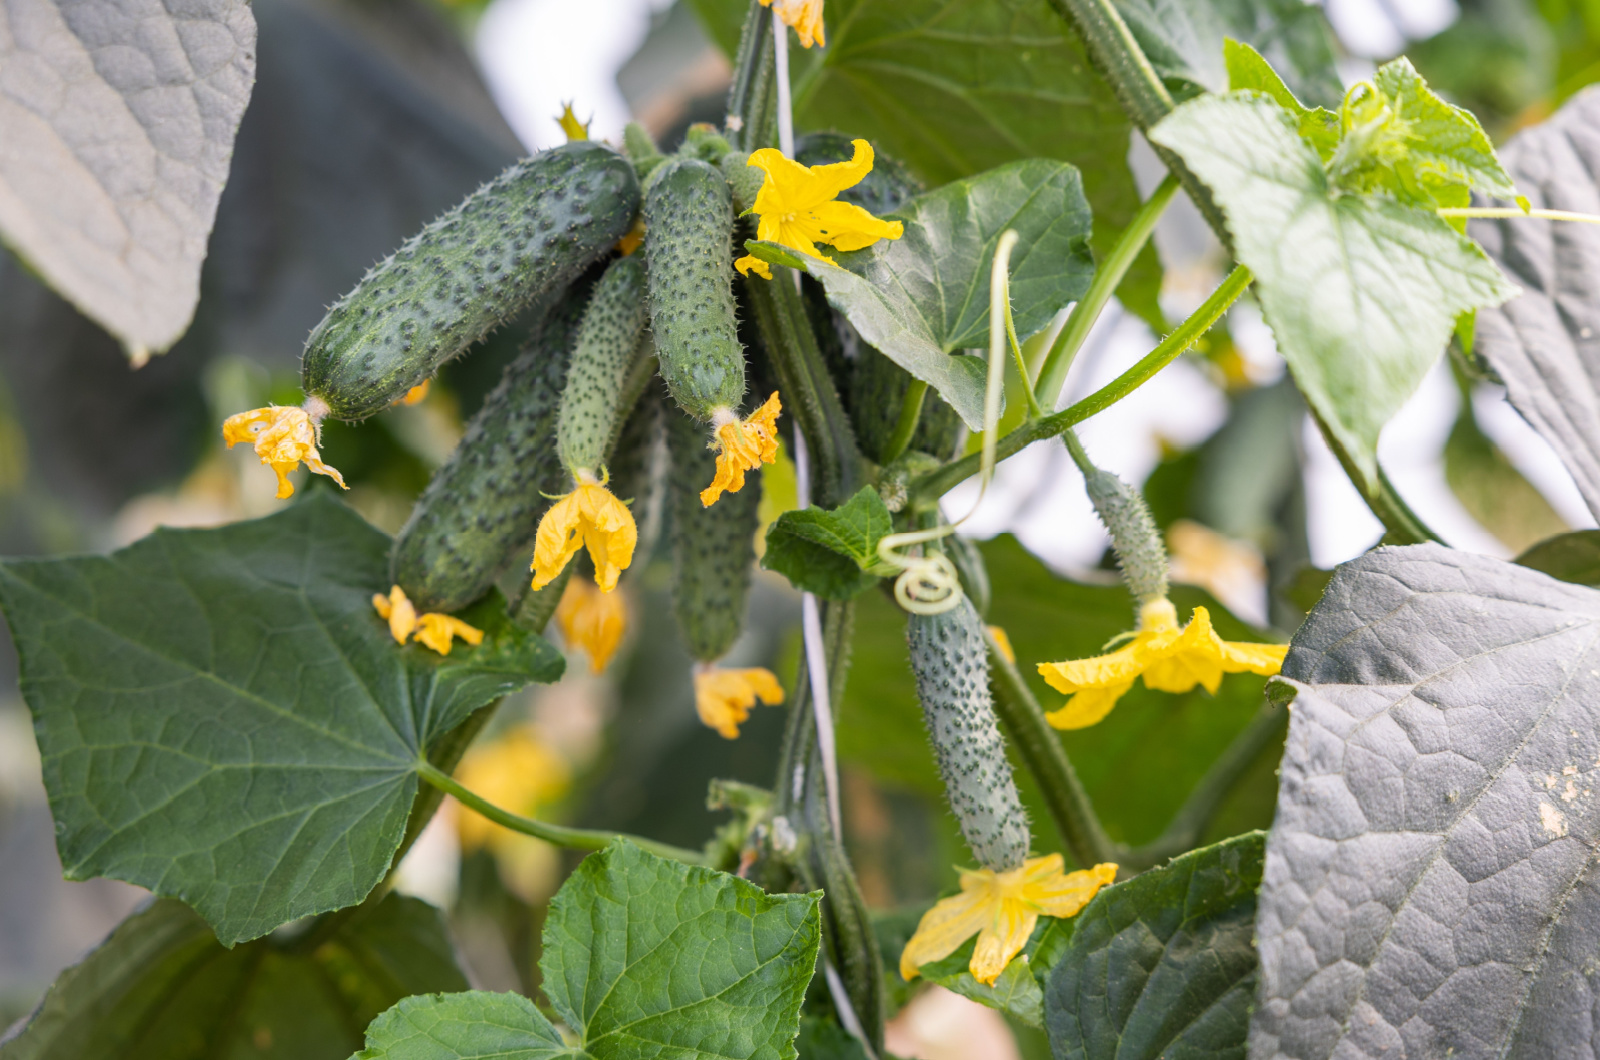 Cucumbers ripen on a hanging stem